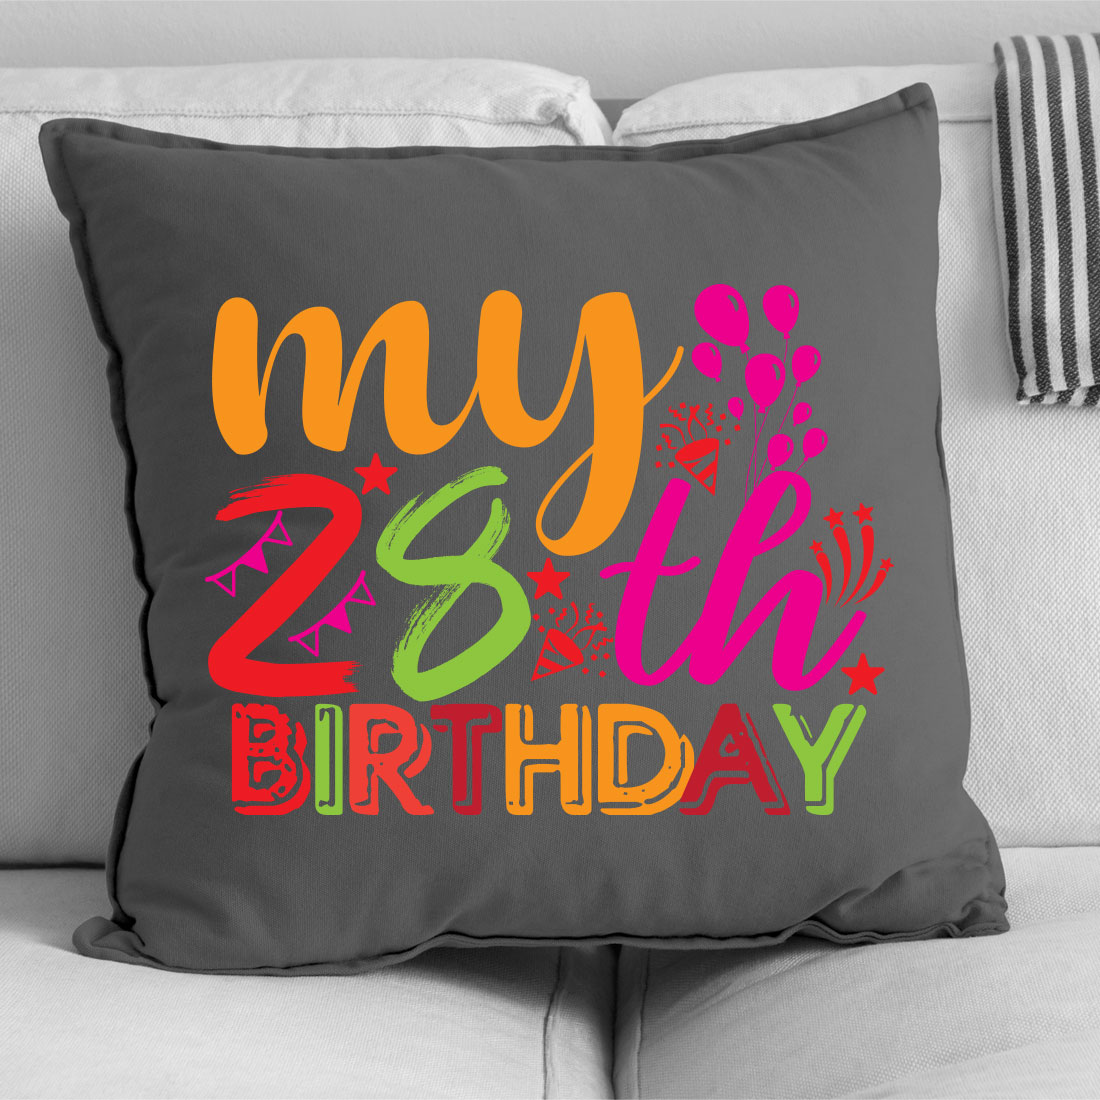 Pillow that says my 23rd birthday on it.